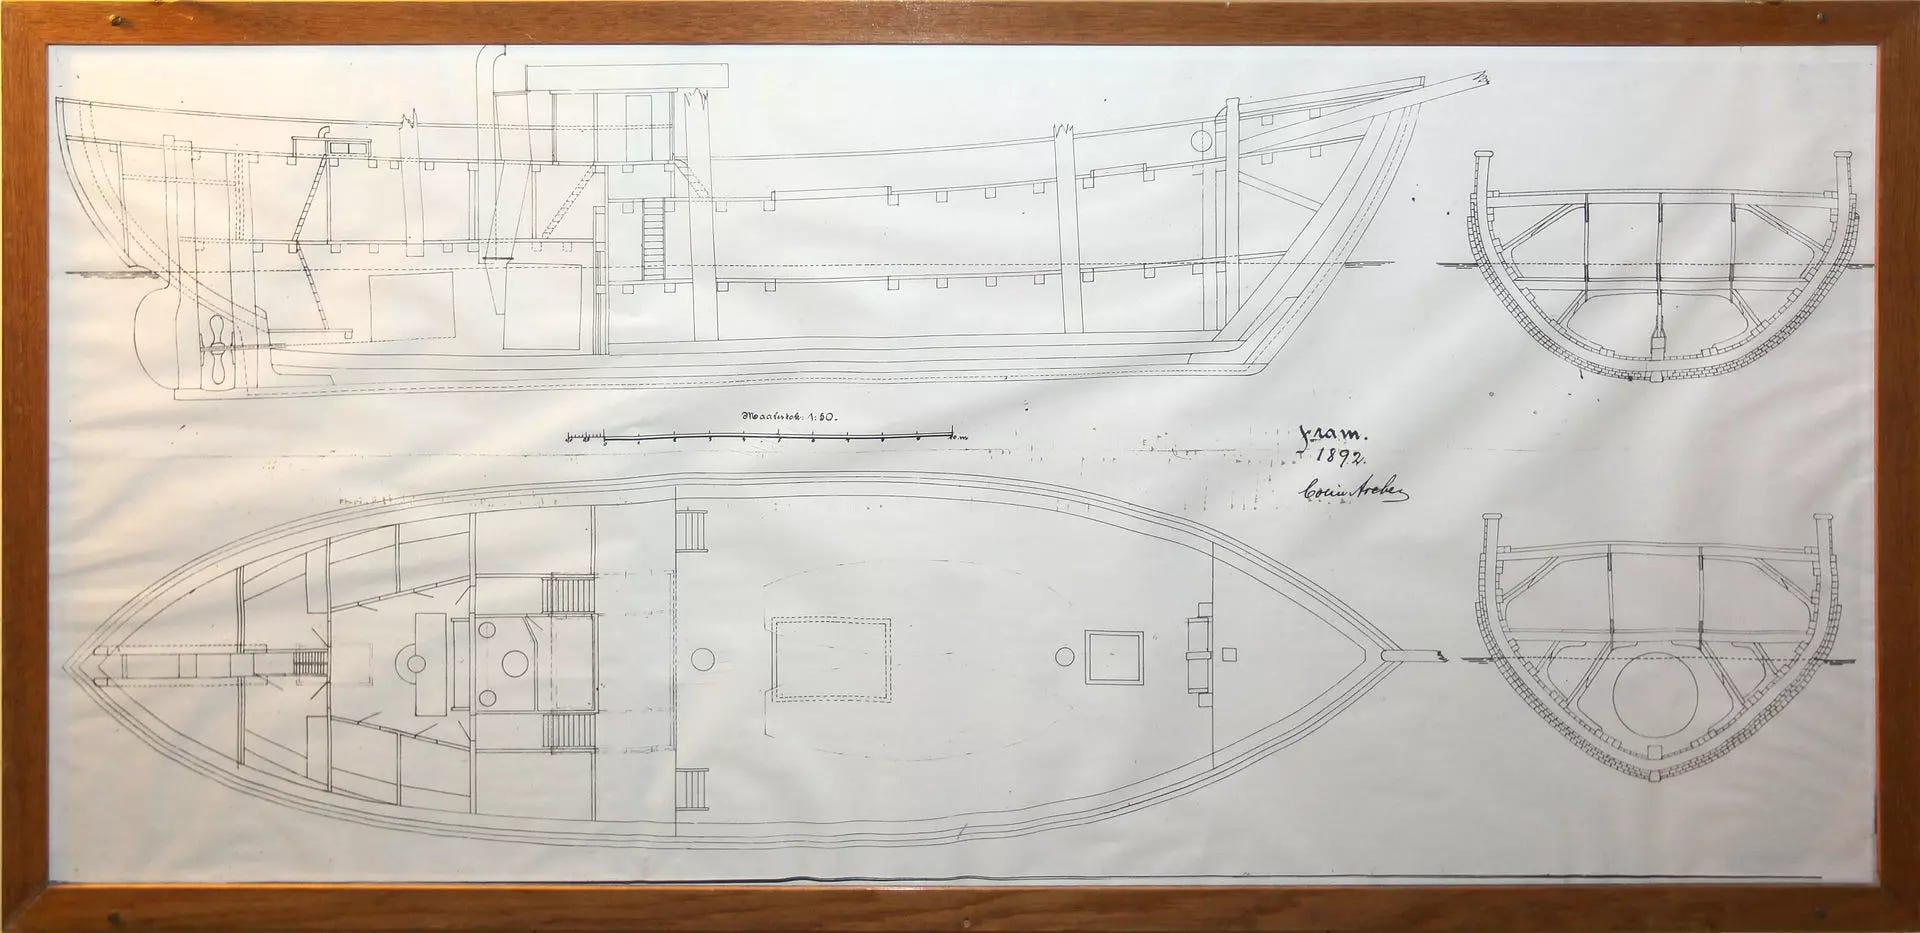 “Fram” engineering drawing, by naval architect and shipbuilder Colin Archer